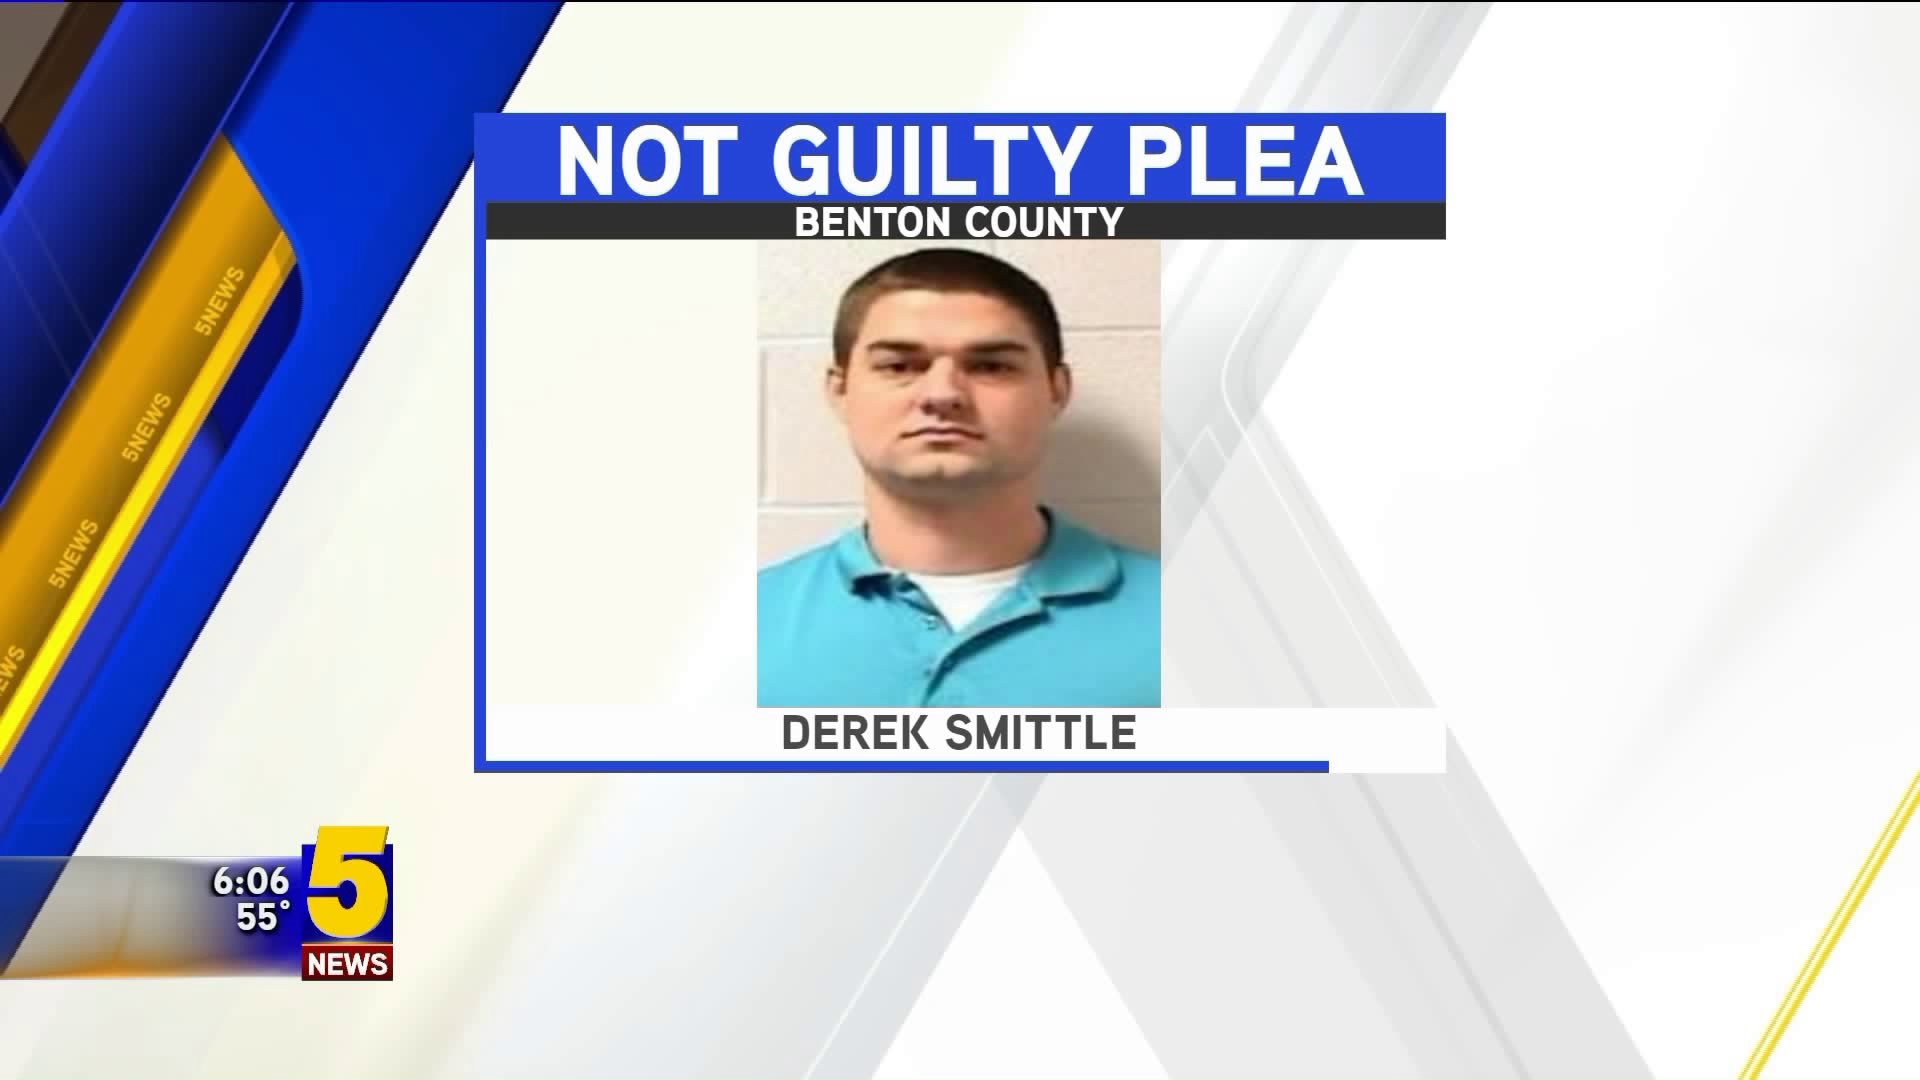 Centerton Youth Pastor Pleads Not Guilty To Sexual Assault